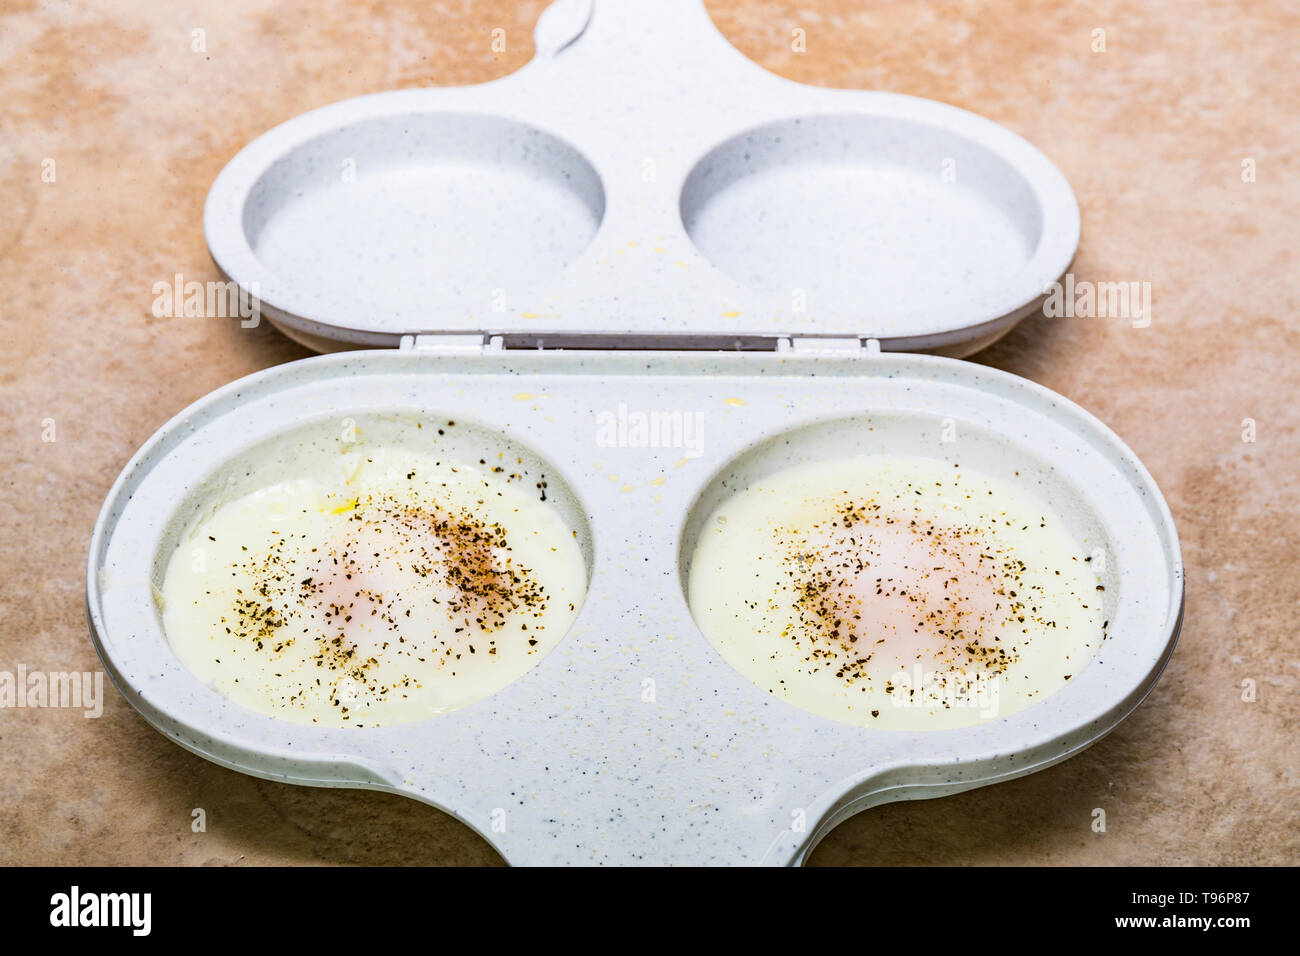 https://c8.alamy.com/comp/T96P87/microwave-two-egg-cooker-with-two-cooked-eggs-T96P87.jpg